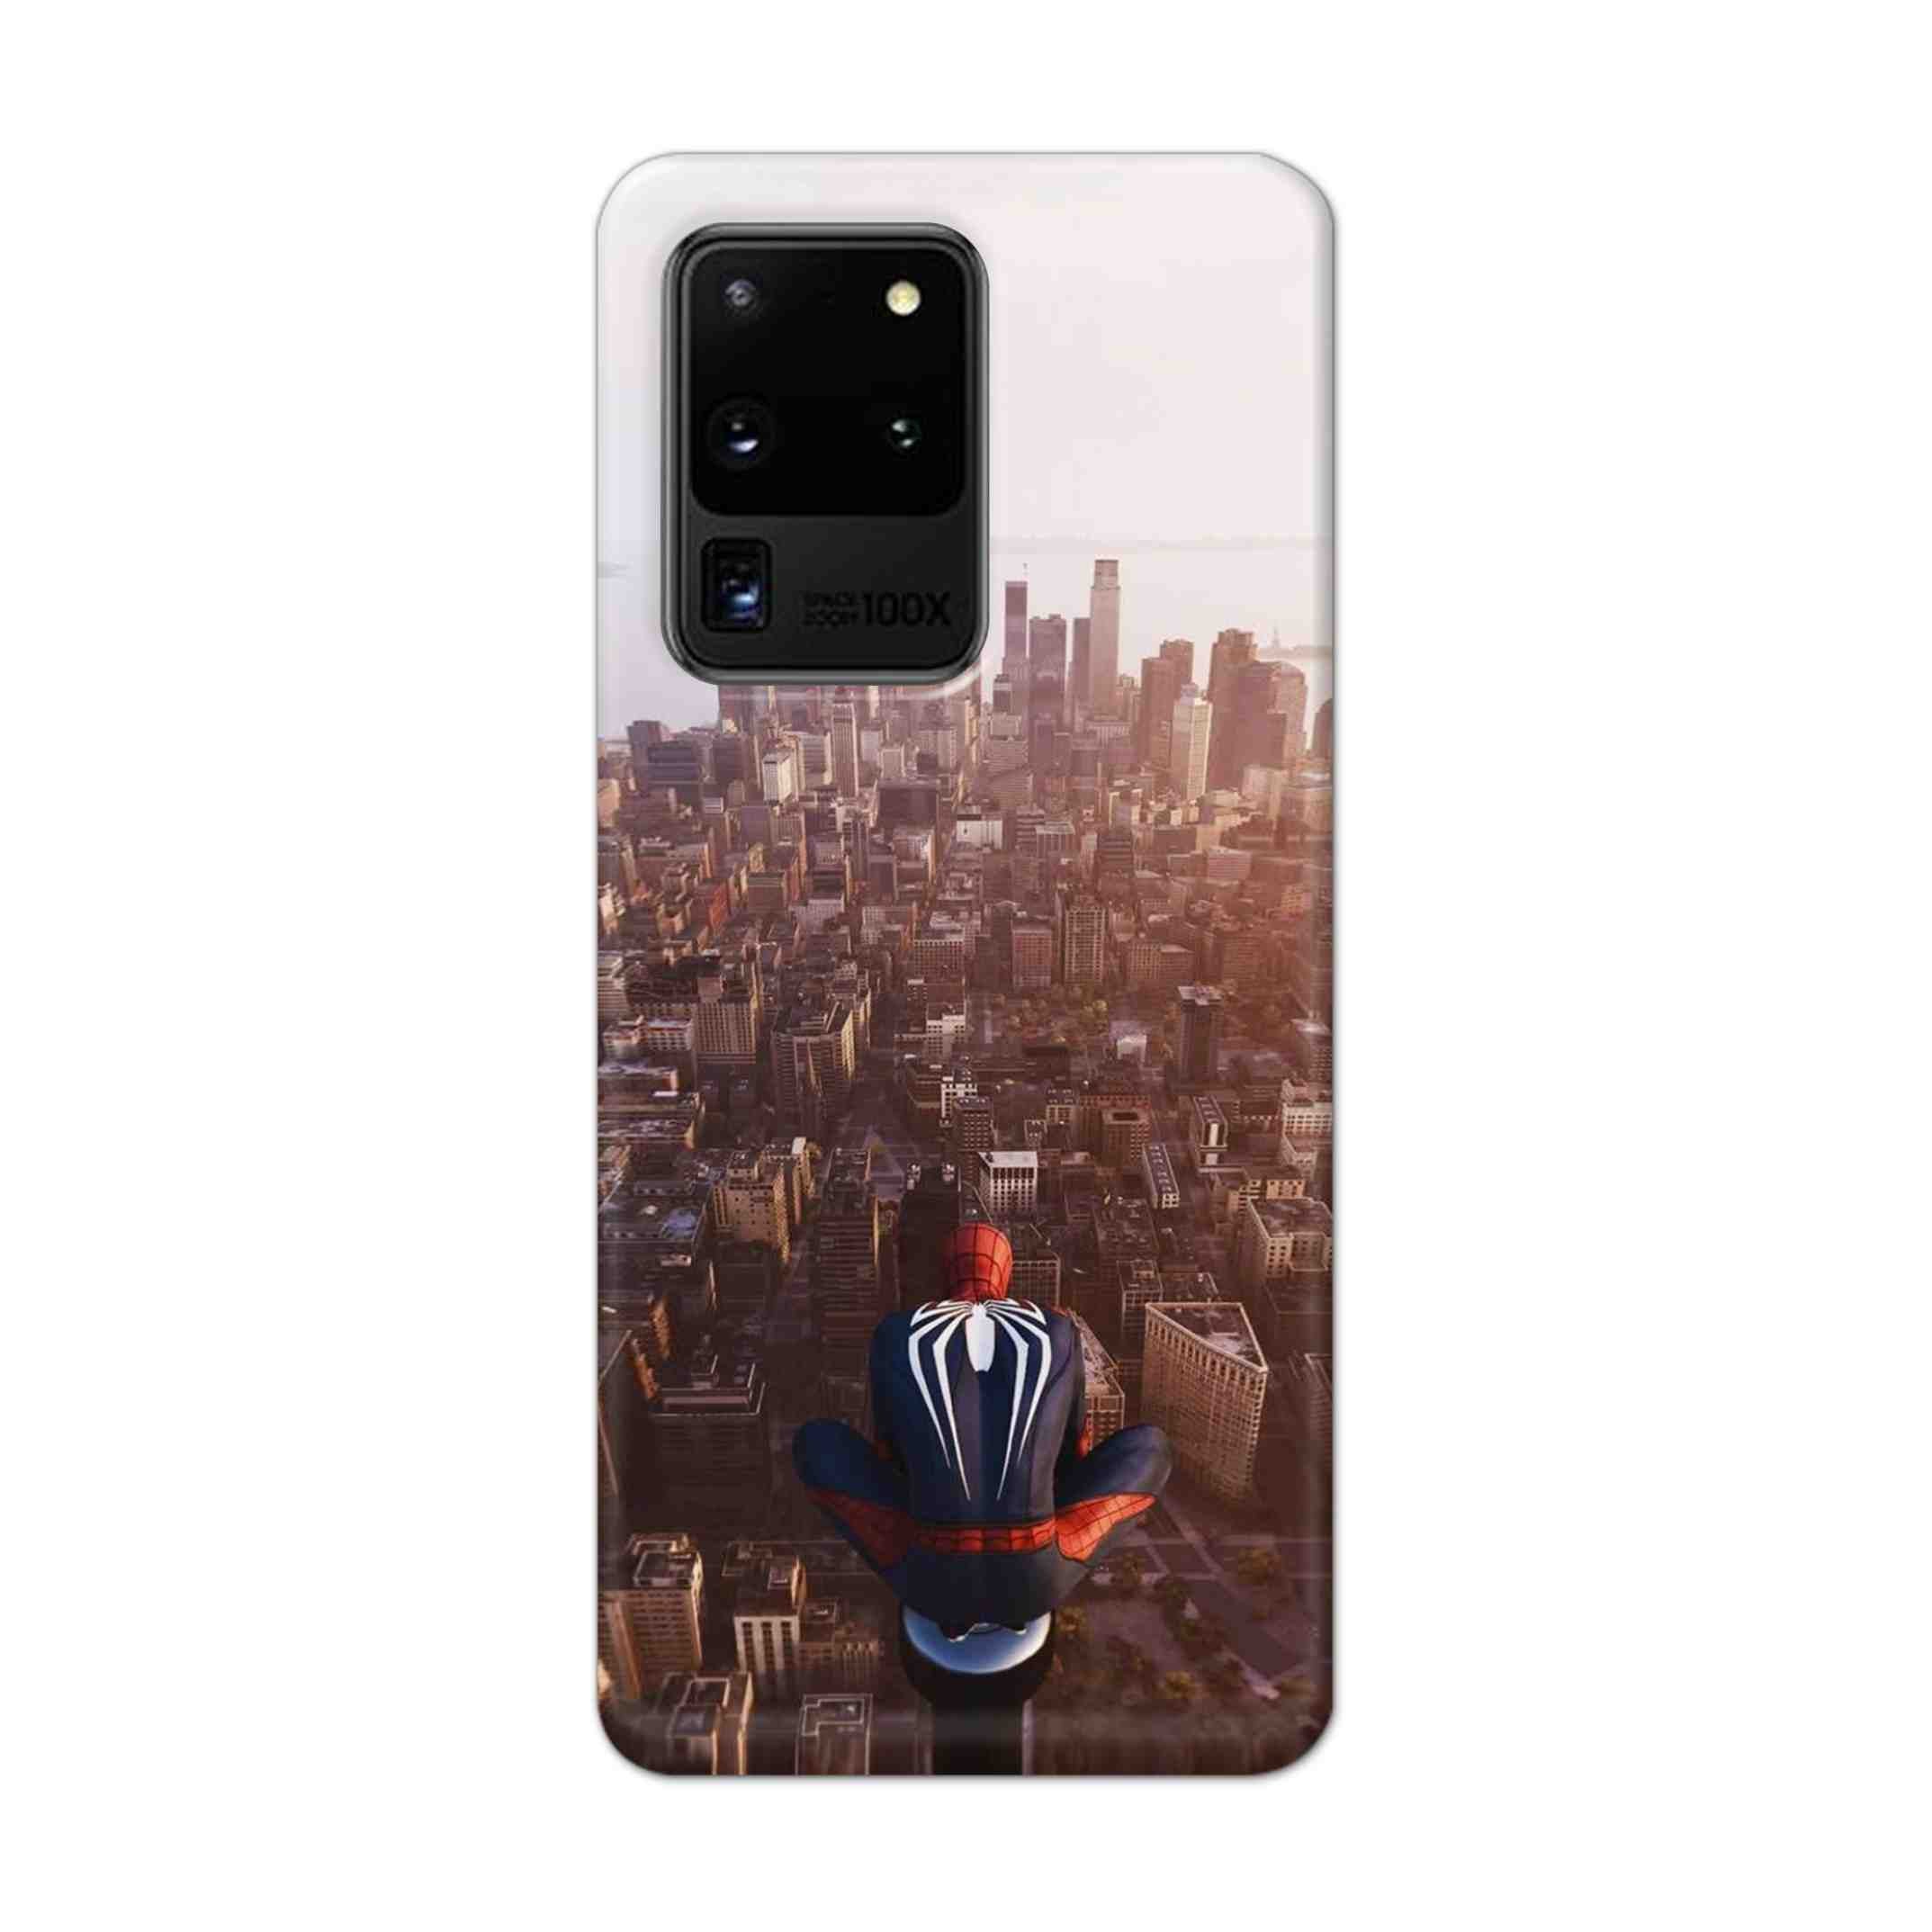 Buy City Of Spiderman Hard Back Mobile Phone Case Cover For Samsung Galaxy S20 Ultra Online